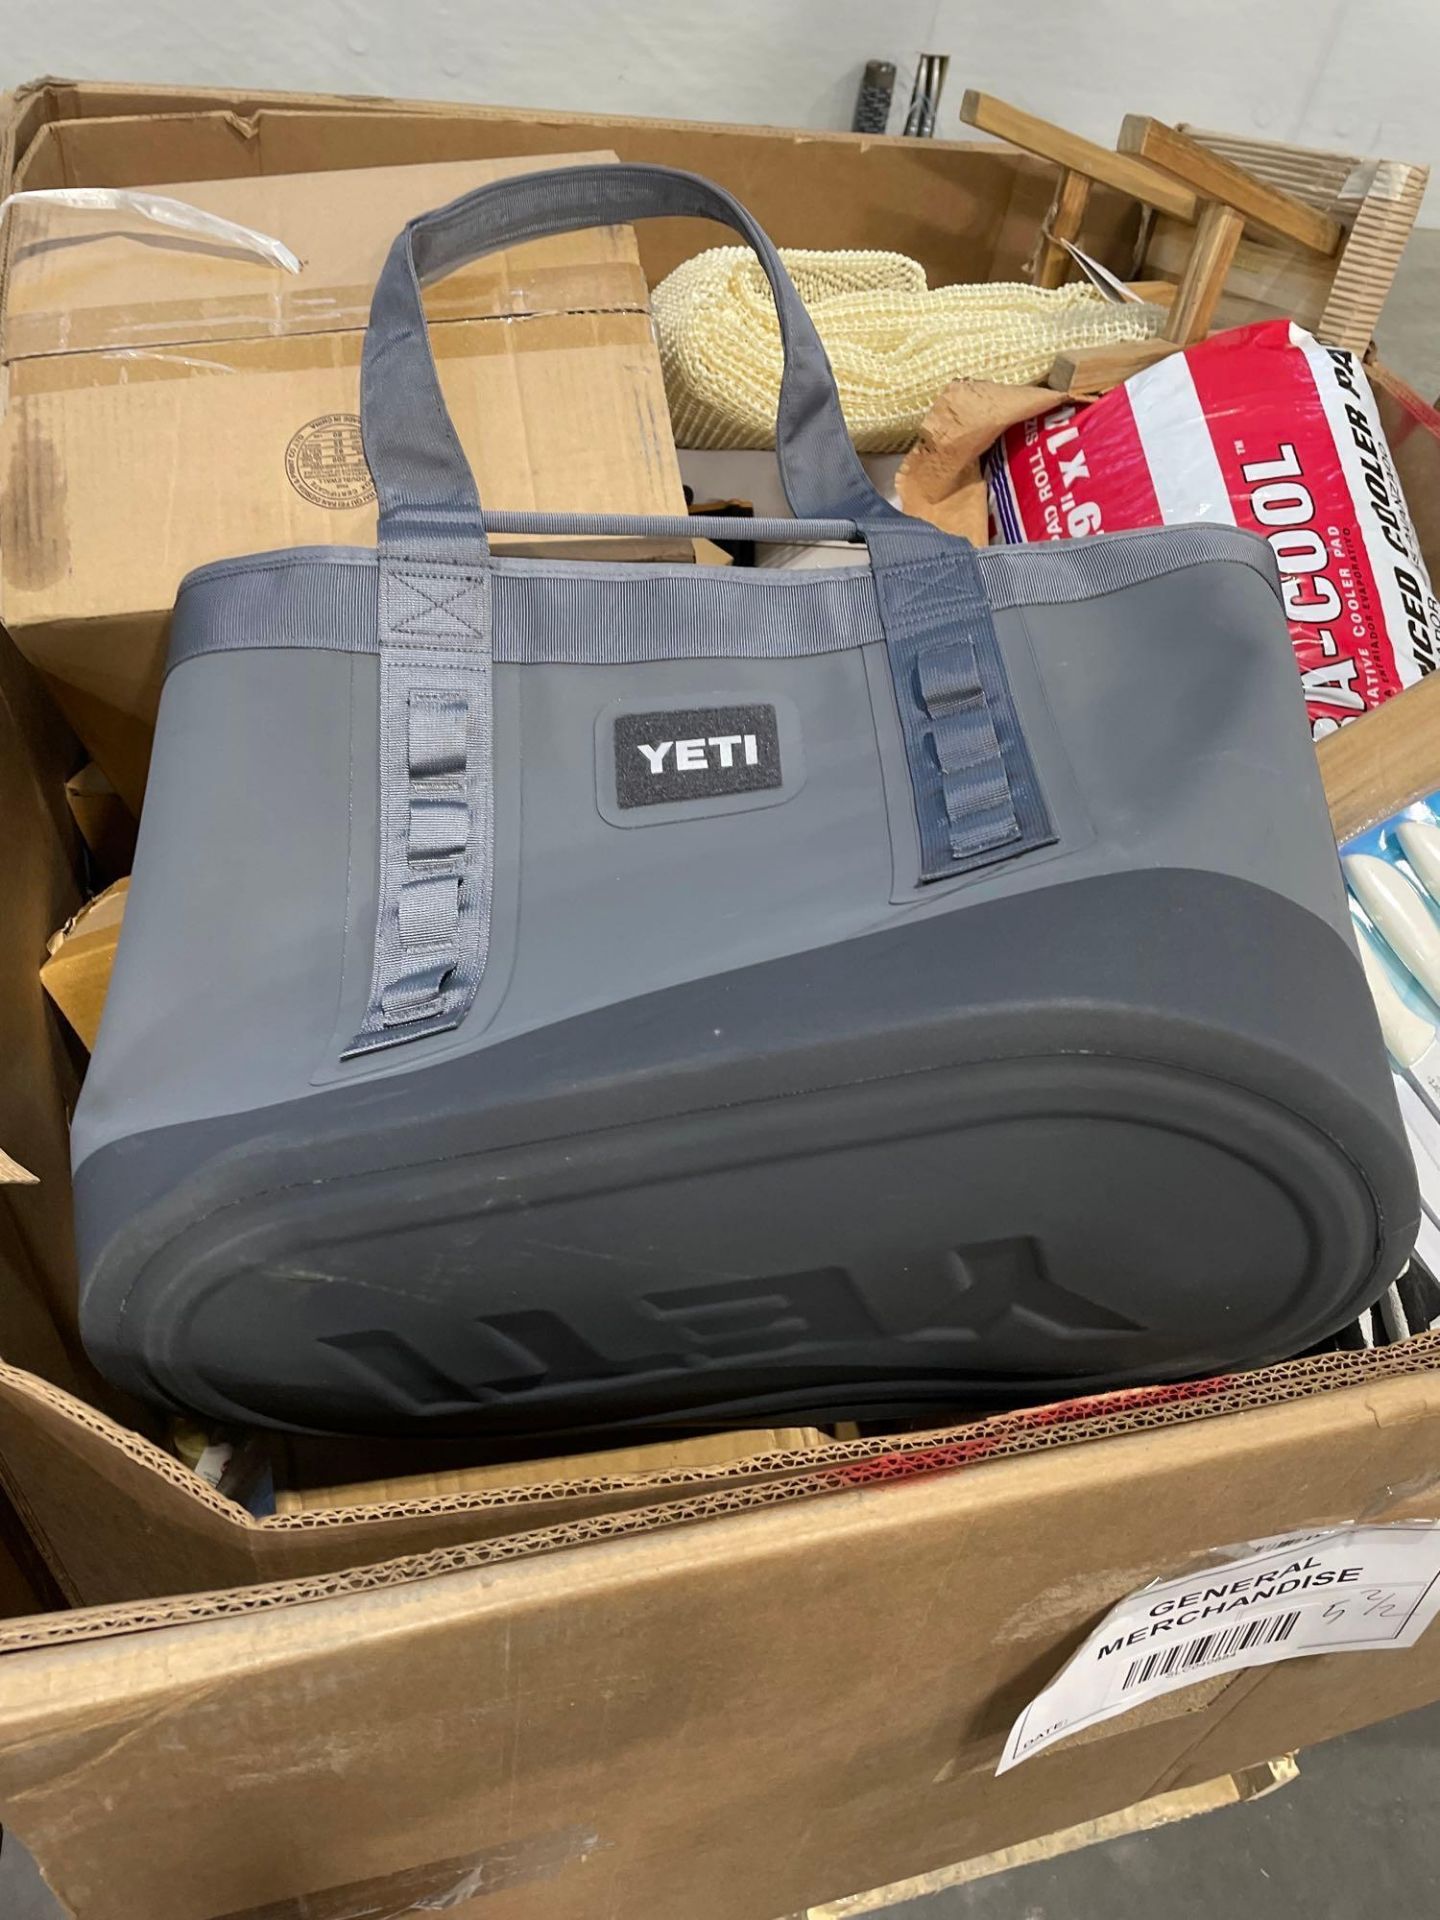 Yeti carryall, igloo cooler, and more - Image 3 of 19